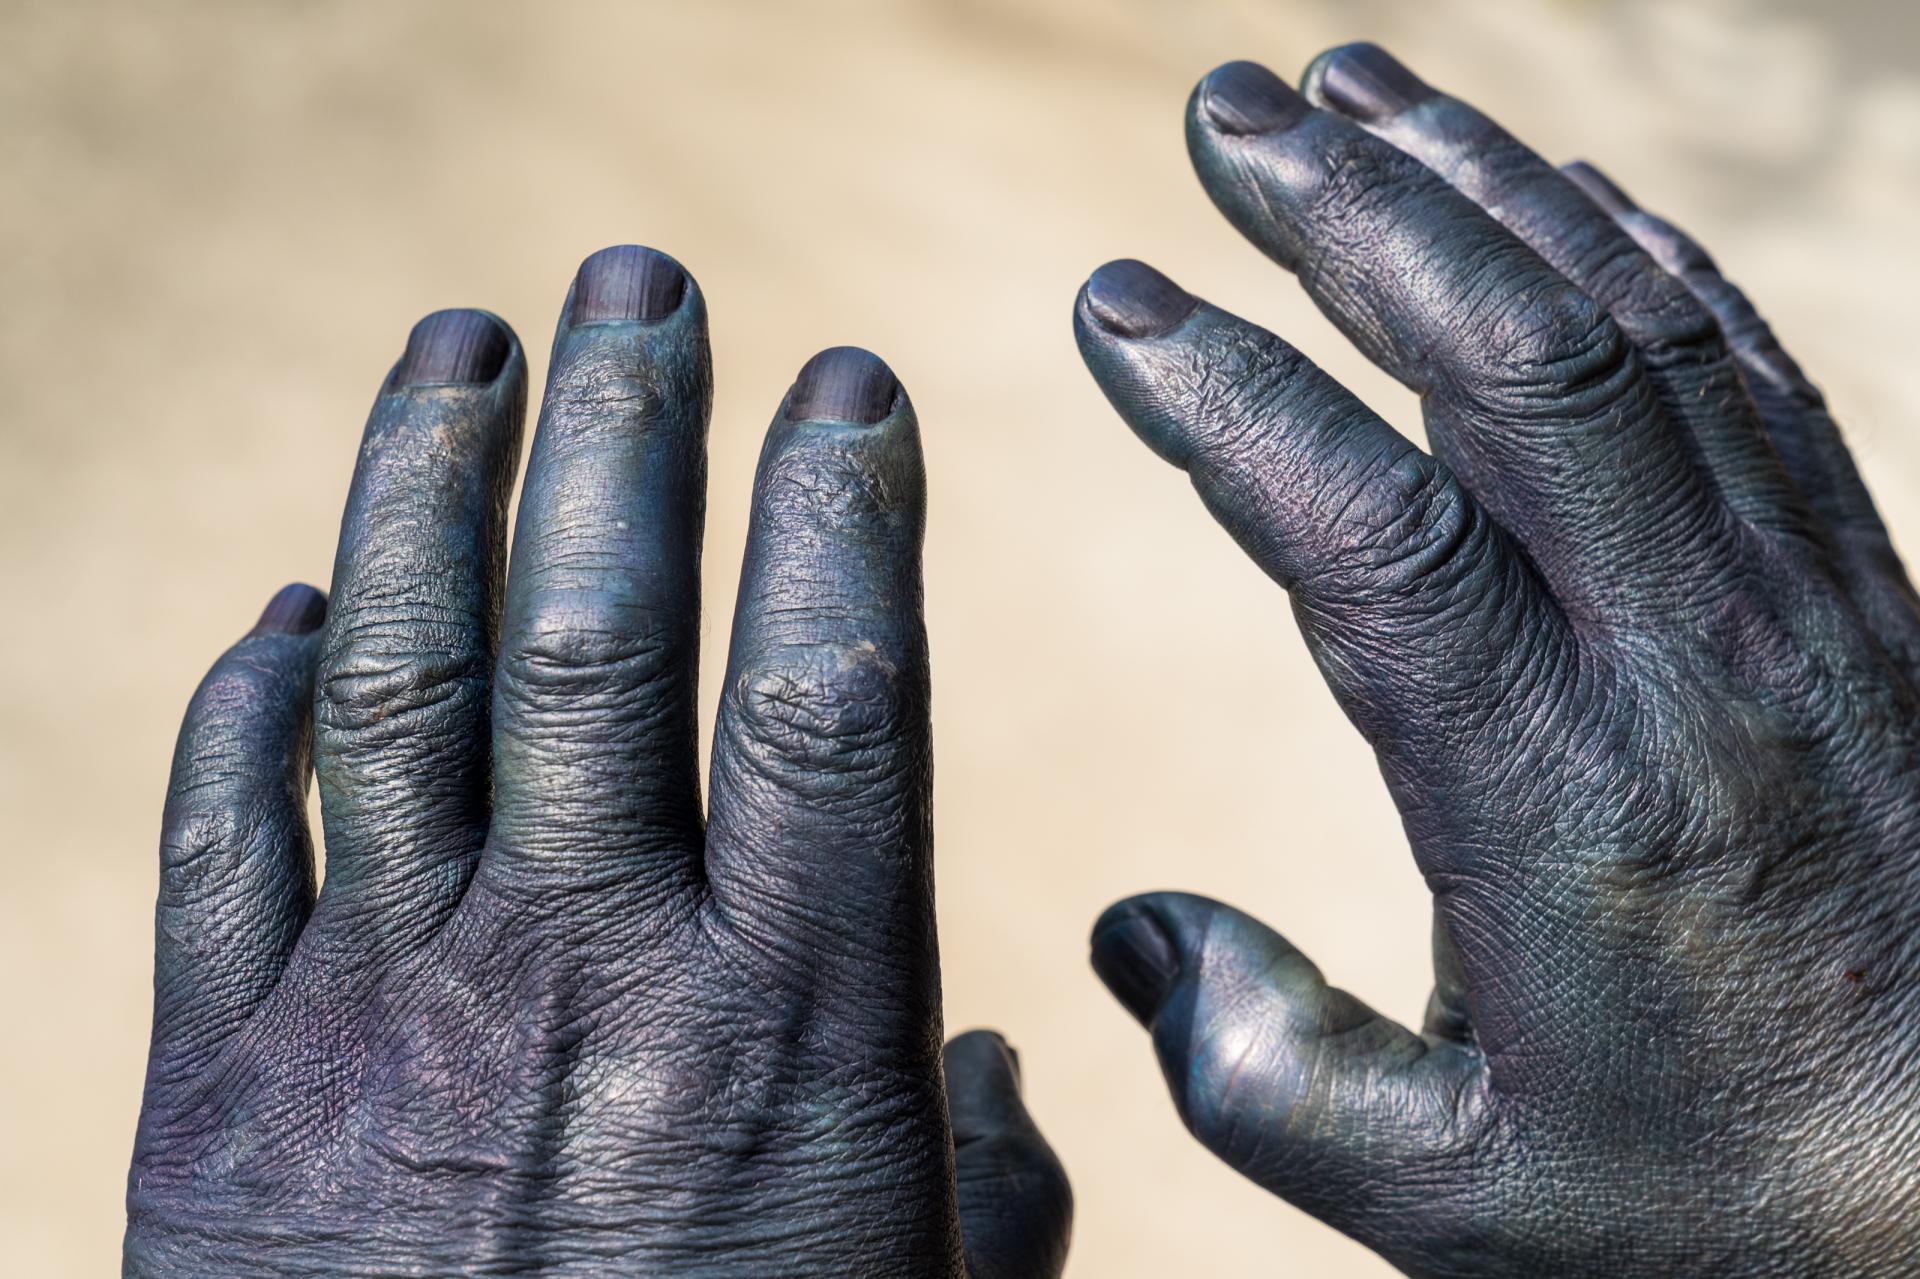 Yano’s hands are also dyed indigo blue. This is a point of pride for an indigo dyer.